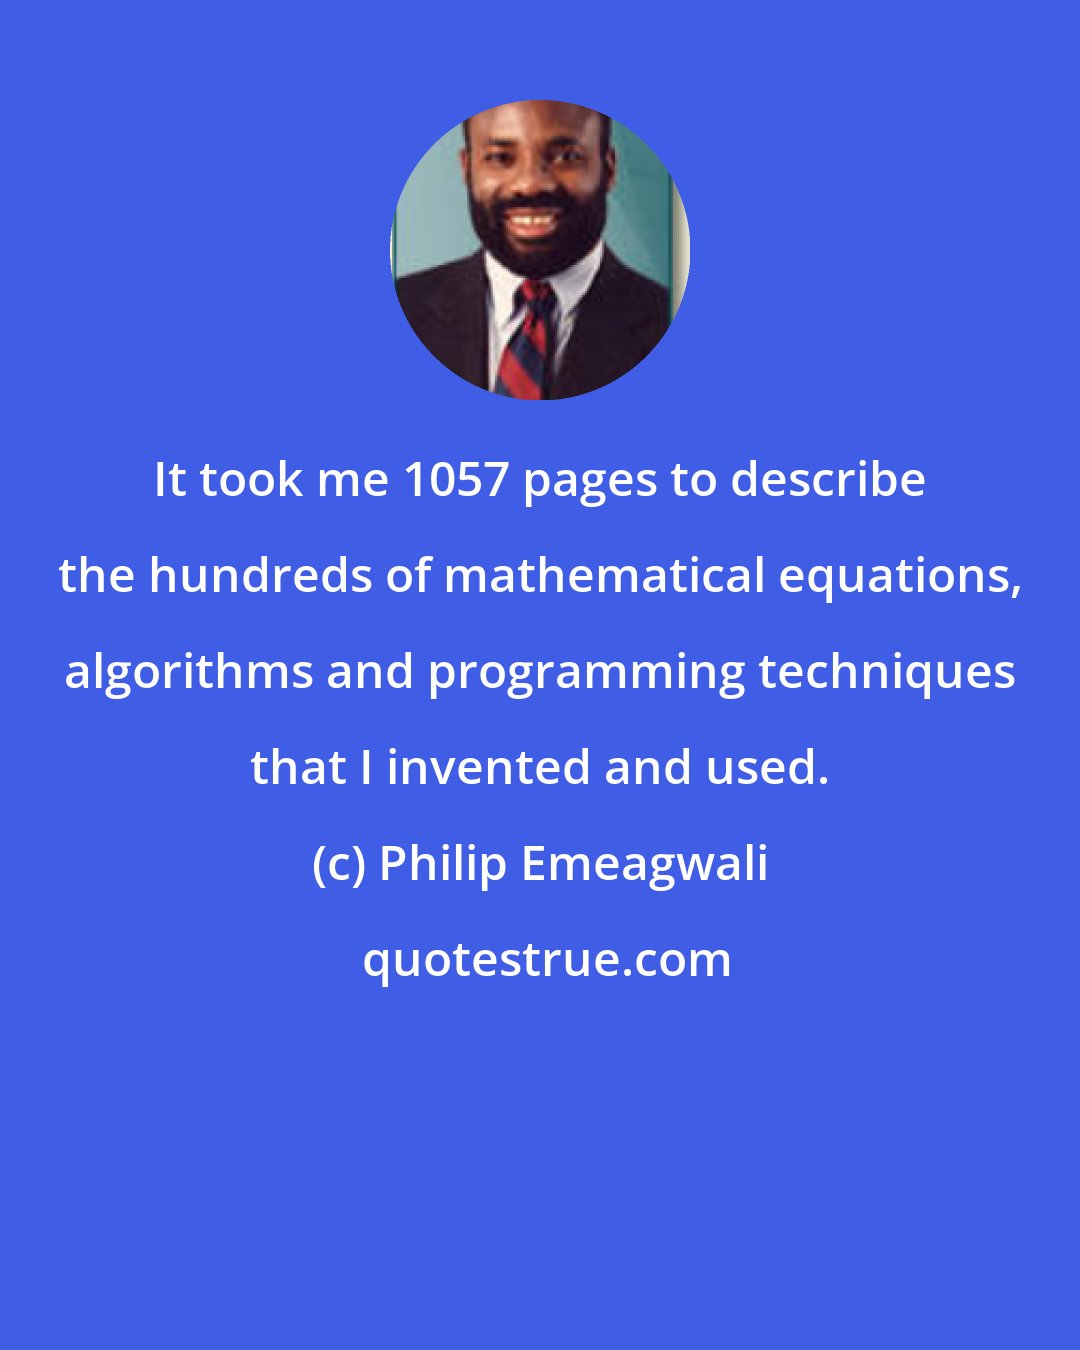 Philip Emeagwali: It took me 1057 pages to describe the hundreds of mathematical equations, algorithms and programming techniques that I invented and used.